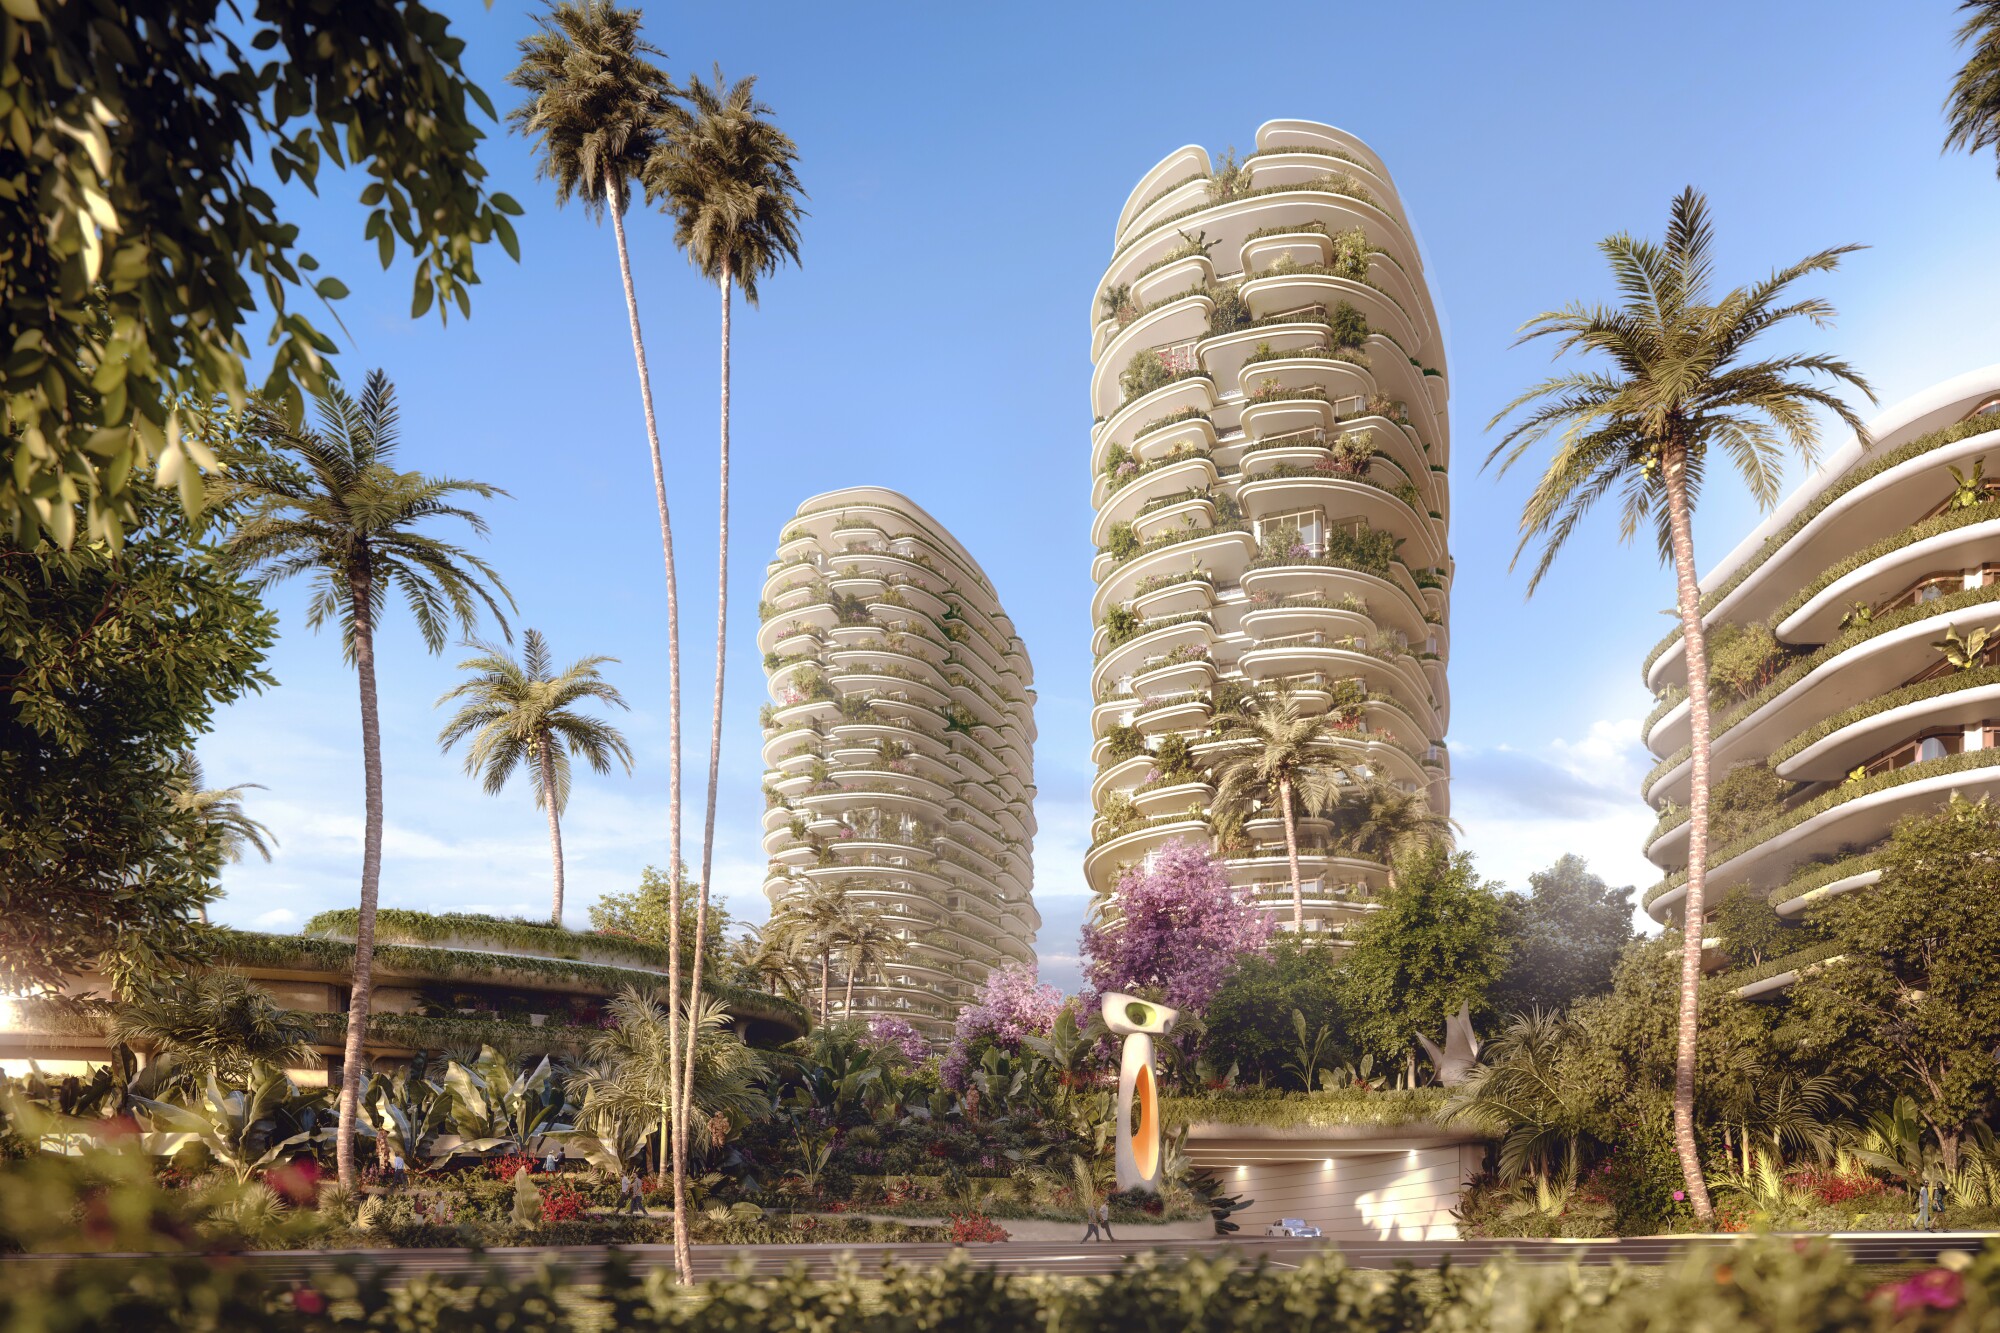 A rendering shows One Beverly Hills, a planned $2-billion garden-like residential and hotel complex in Beverly Hills. The Aman hotel is on the right.(Foster + Partners)